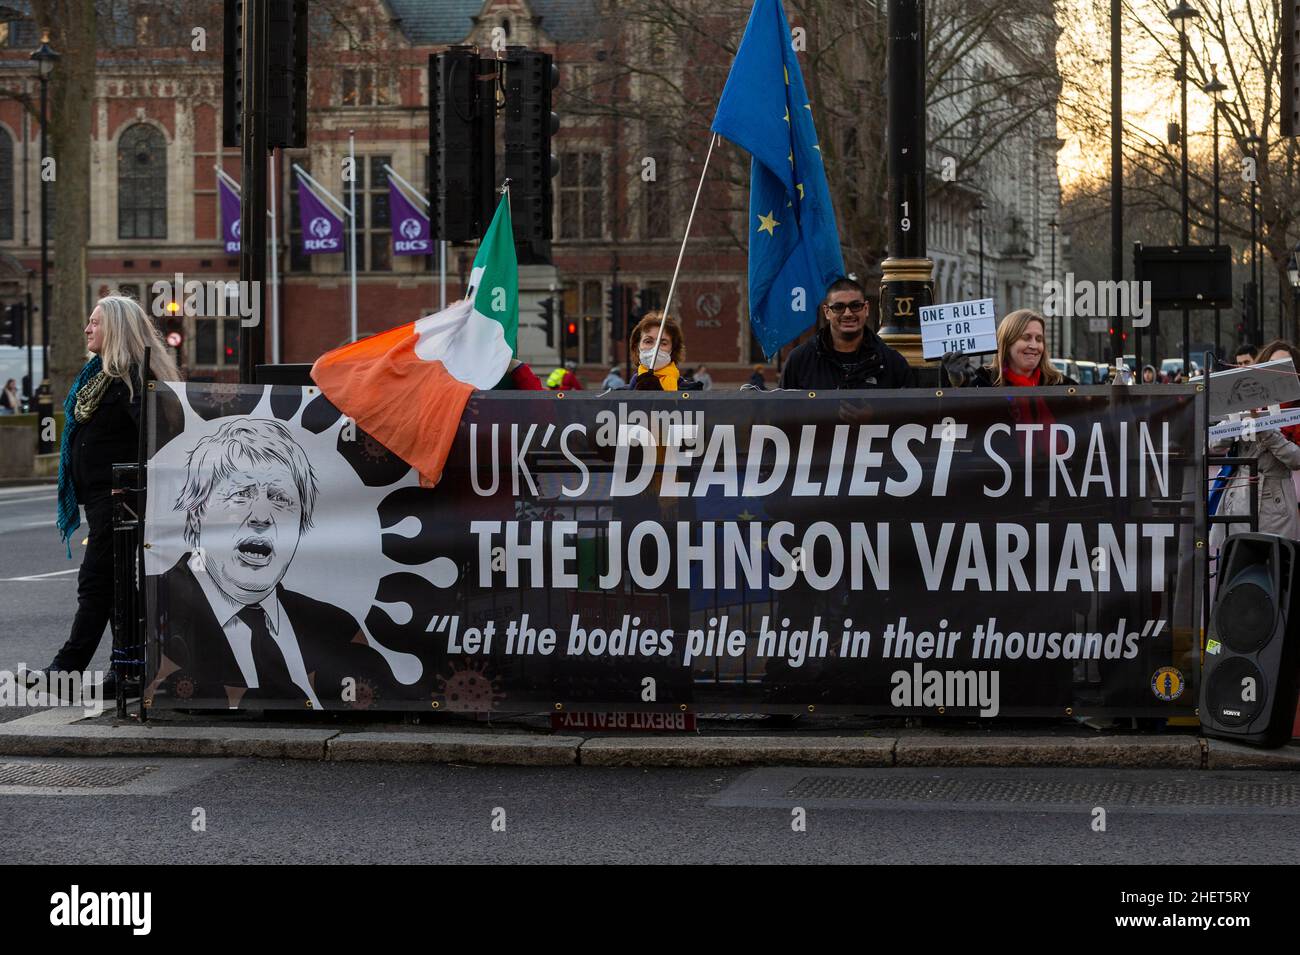 London, UK.  12 January 2022.  Protesters opposite the Houses of Parliament with banners and signs expressing their views as Boris Johnson, Prime Minister, apologised in the Houses of Commons for attending a party on 20 May 2020 in the gardens of 10 Downing Street, at a time when UK lockdown restrictions banned social gatherings.    Credit: Stephen Chung / Alamy Live News Stock Photo